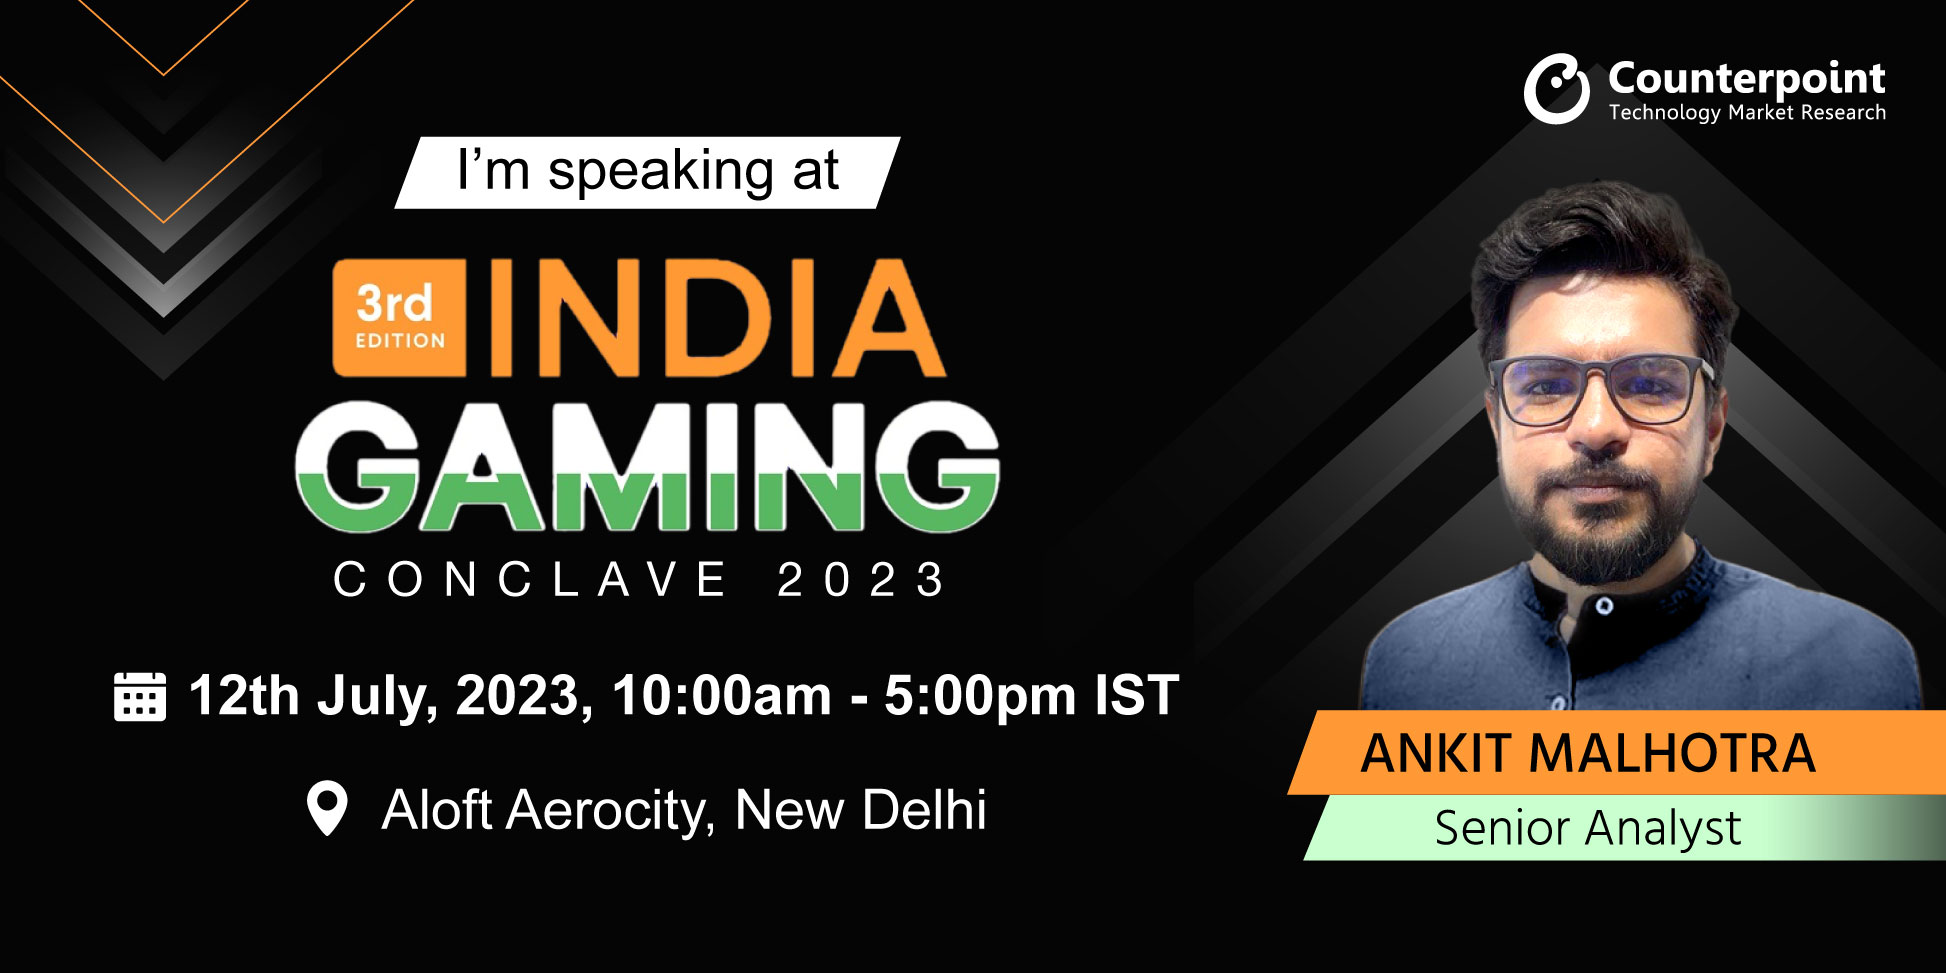 India Gaming Conclave 2023 Ft. Ankit Malhotra